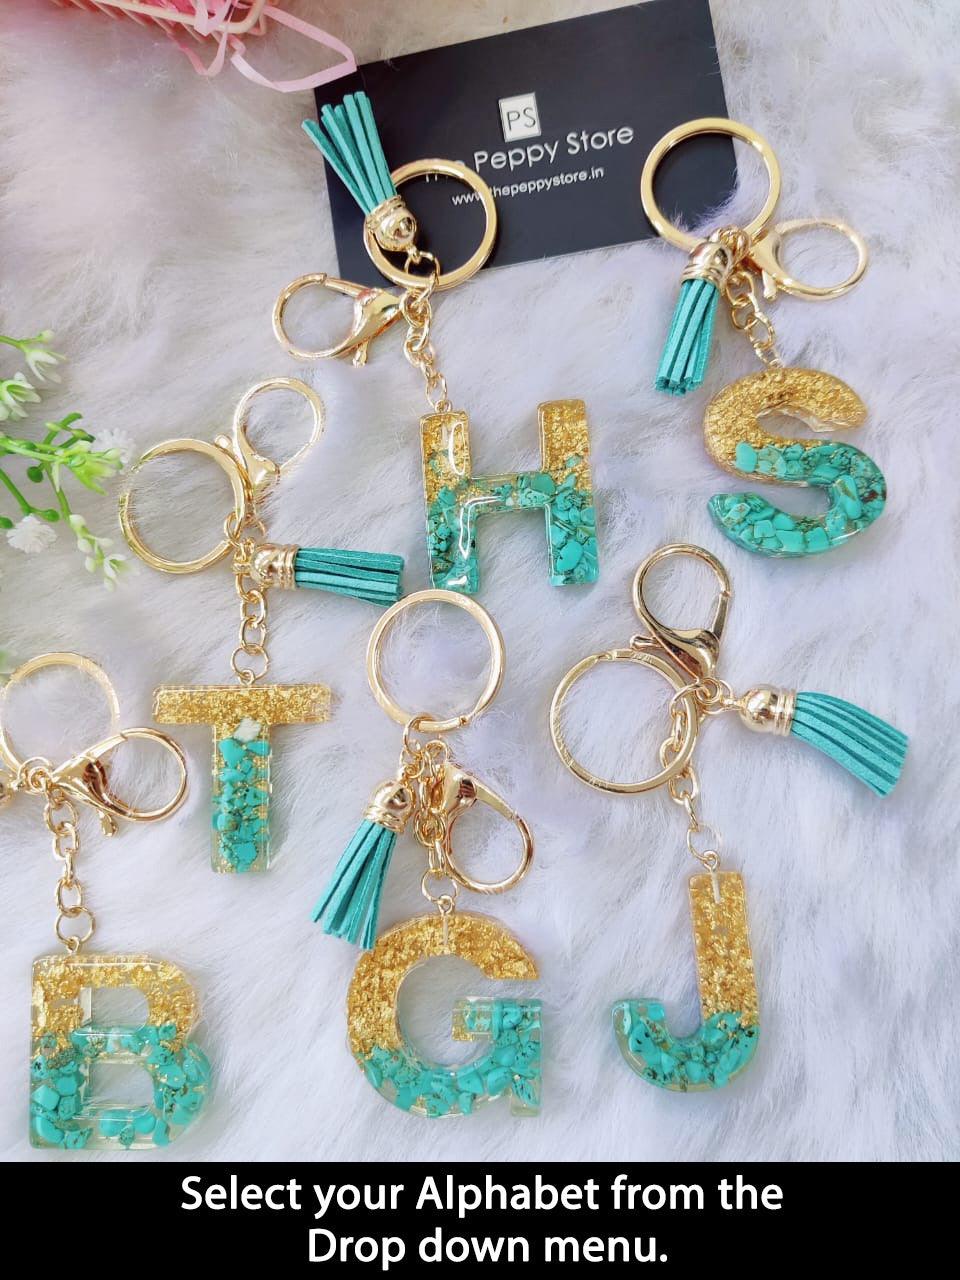 Resin Keychain at Rs 99/piece, Resin Keychain in Hyderabad